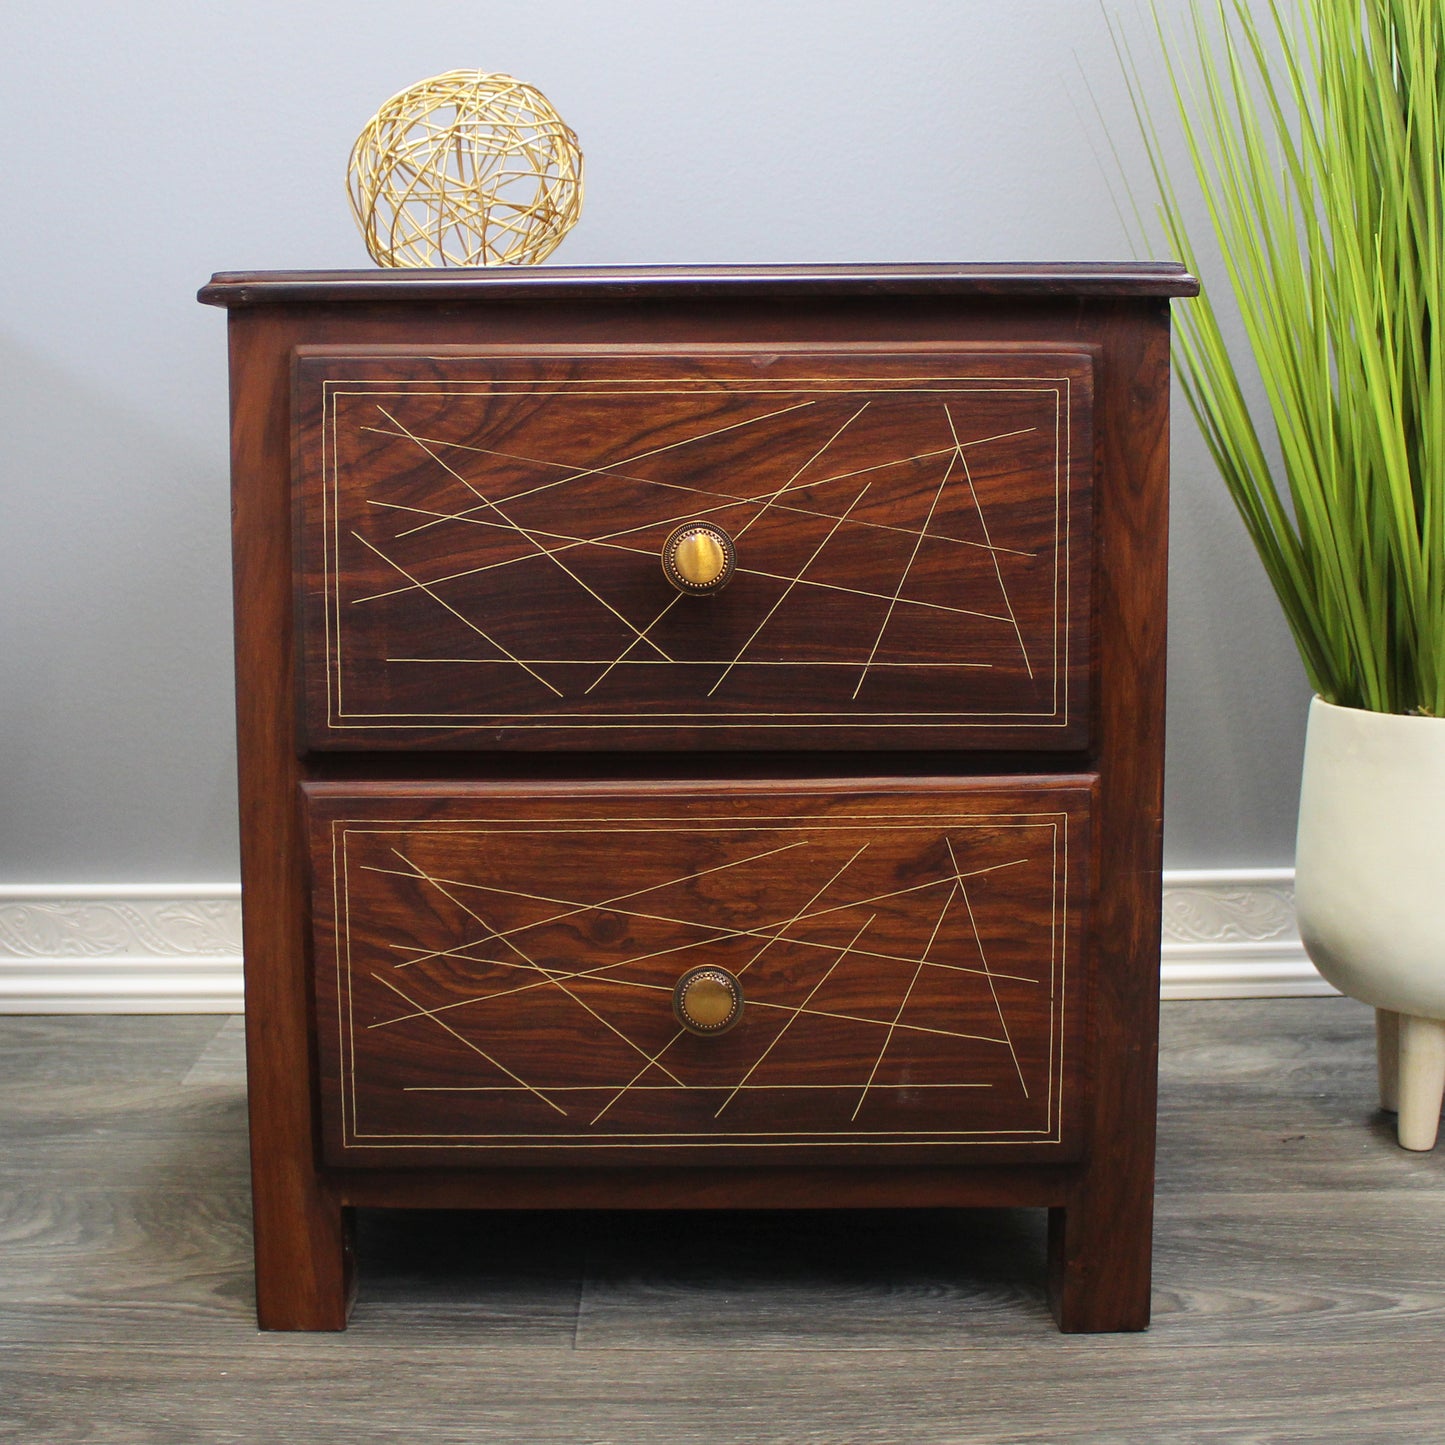 Natural Geo Rosewood Square Wooden End Table - Abstract Golden Brass Inlay